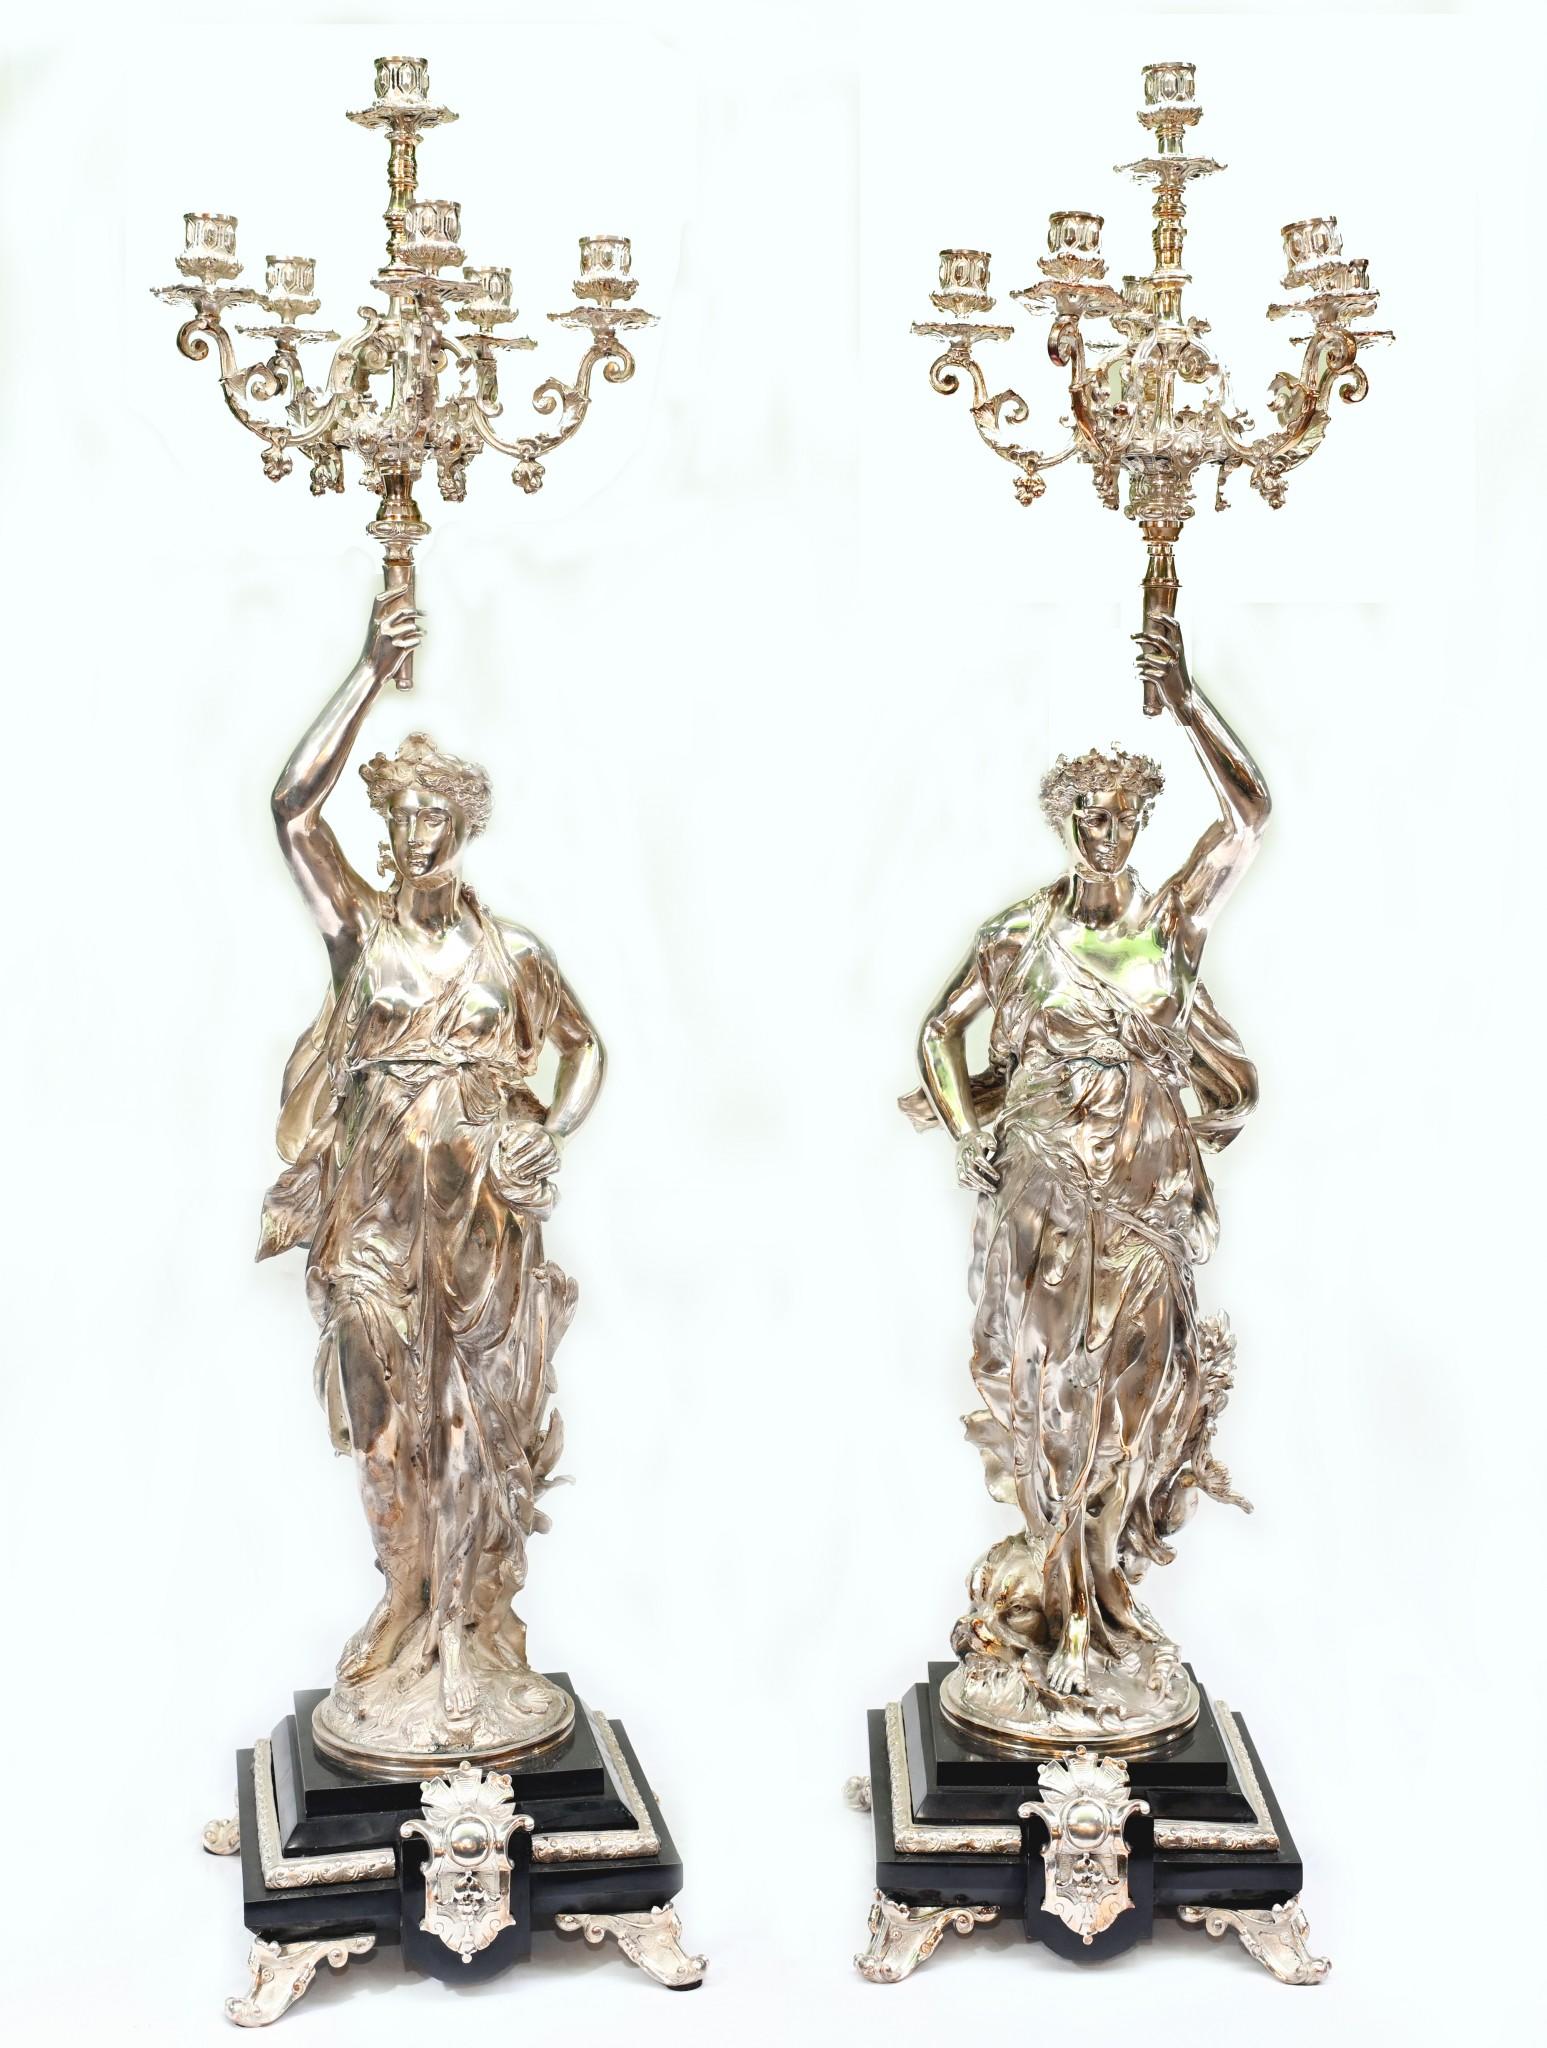 Gorgeous pair of French Silver Plate candelabras by Gregoire
I hope the photos do this stunning pair some justice - better in the flesh!
These stand in at 40 inches tall so an impressive size
Perfect left and right
These remind us of the Statue of